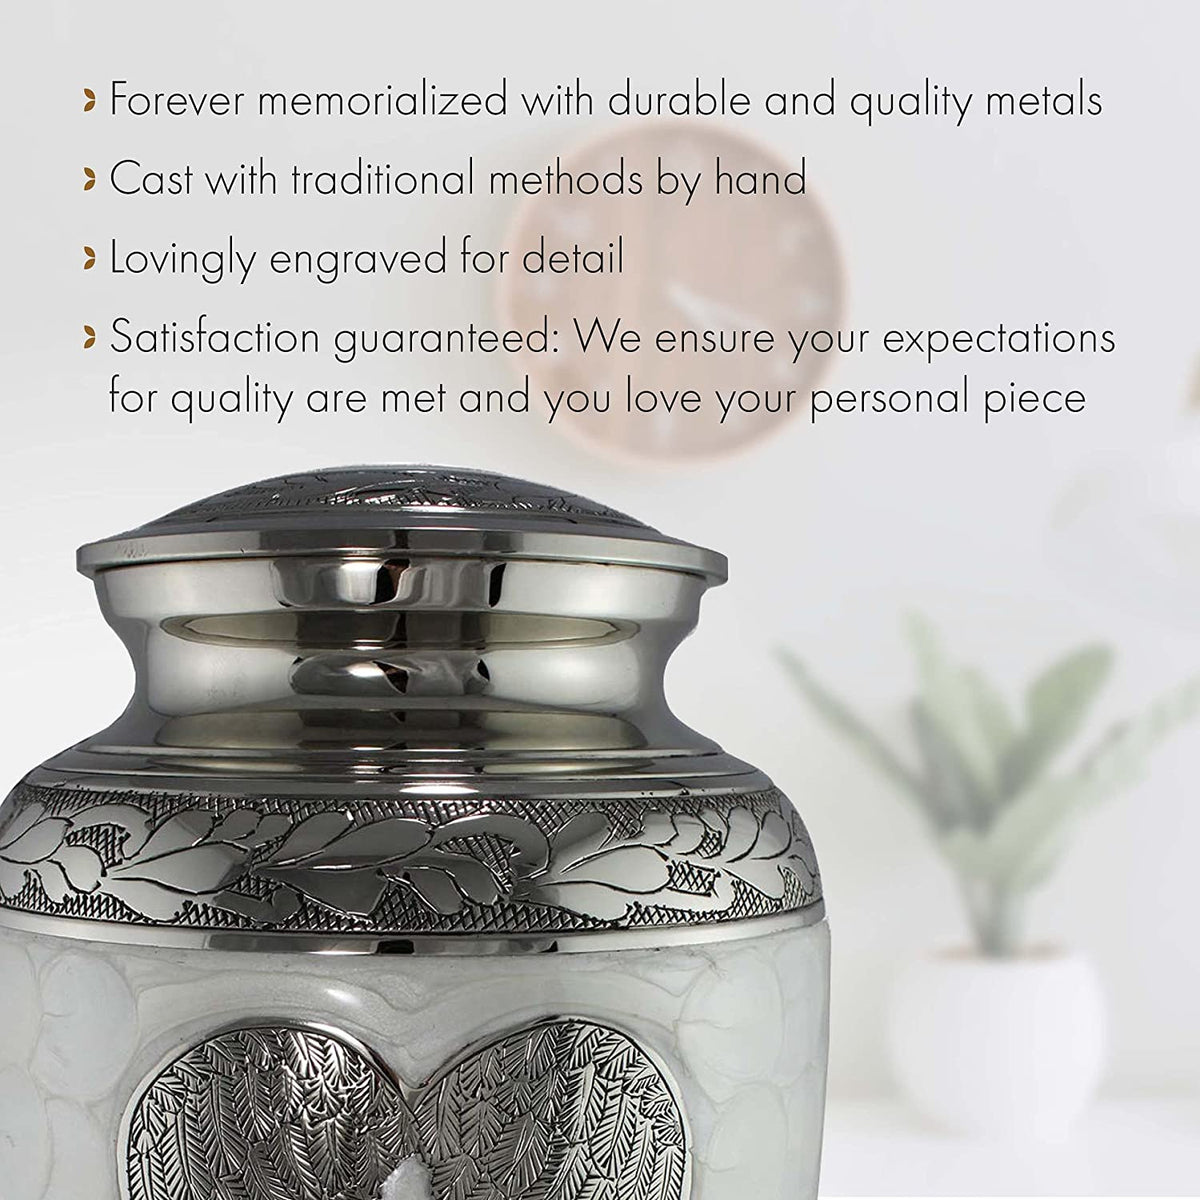 Commemorative Cremation Urns Home &amp; Garden Loving Angel Wings - White Cremation Urn